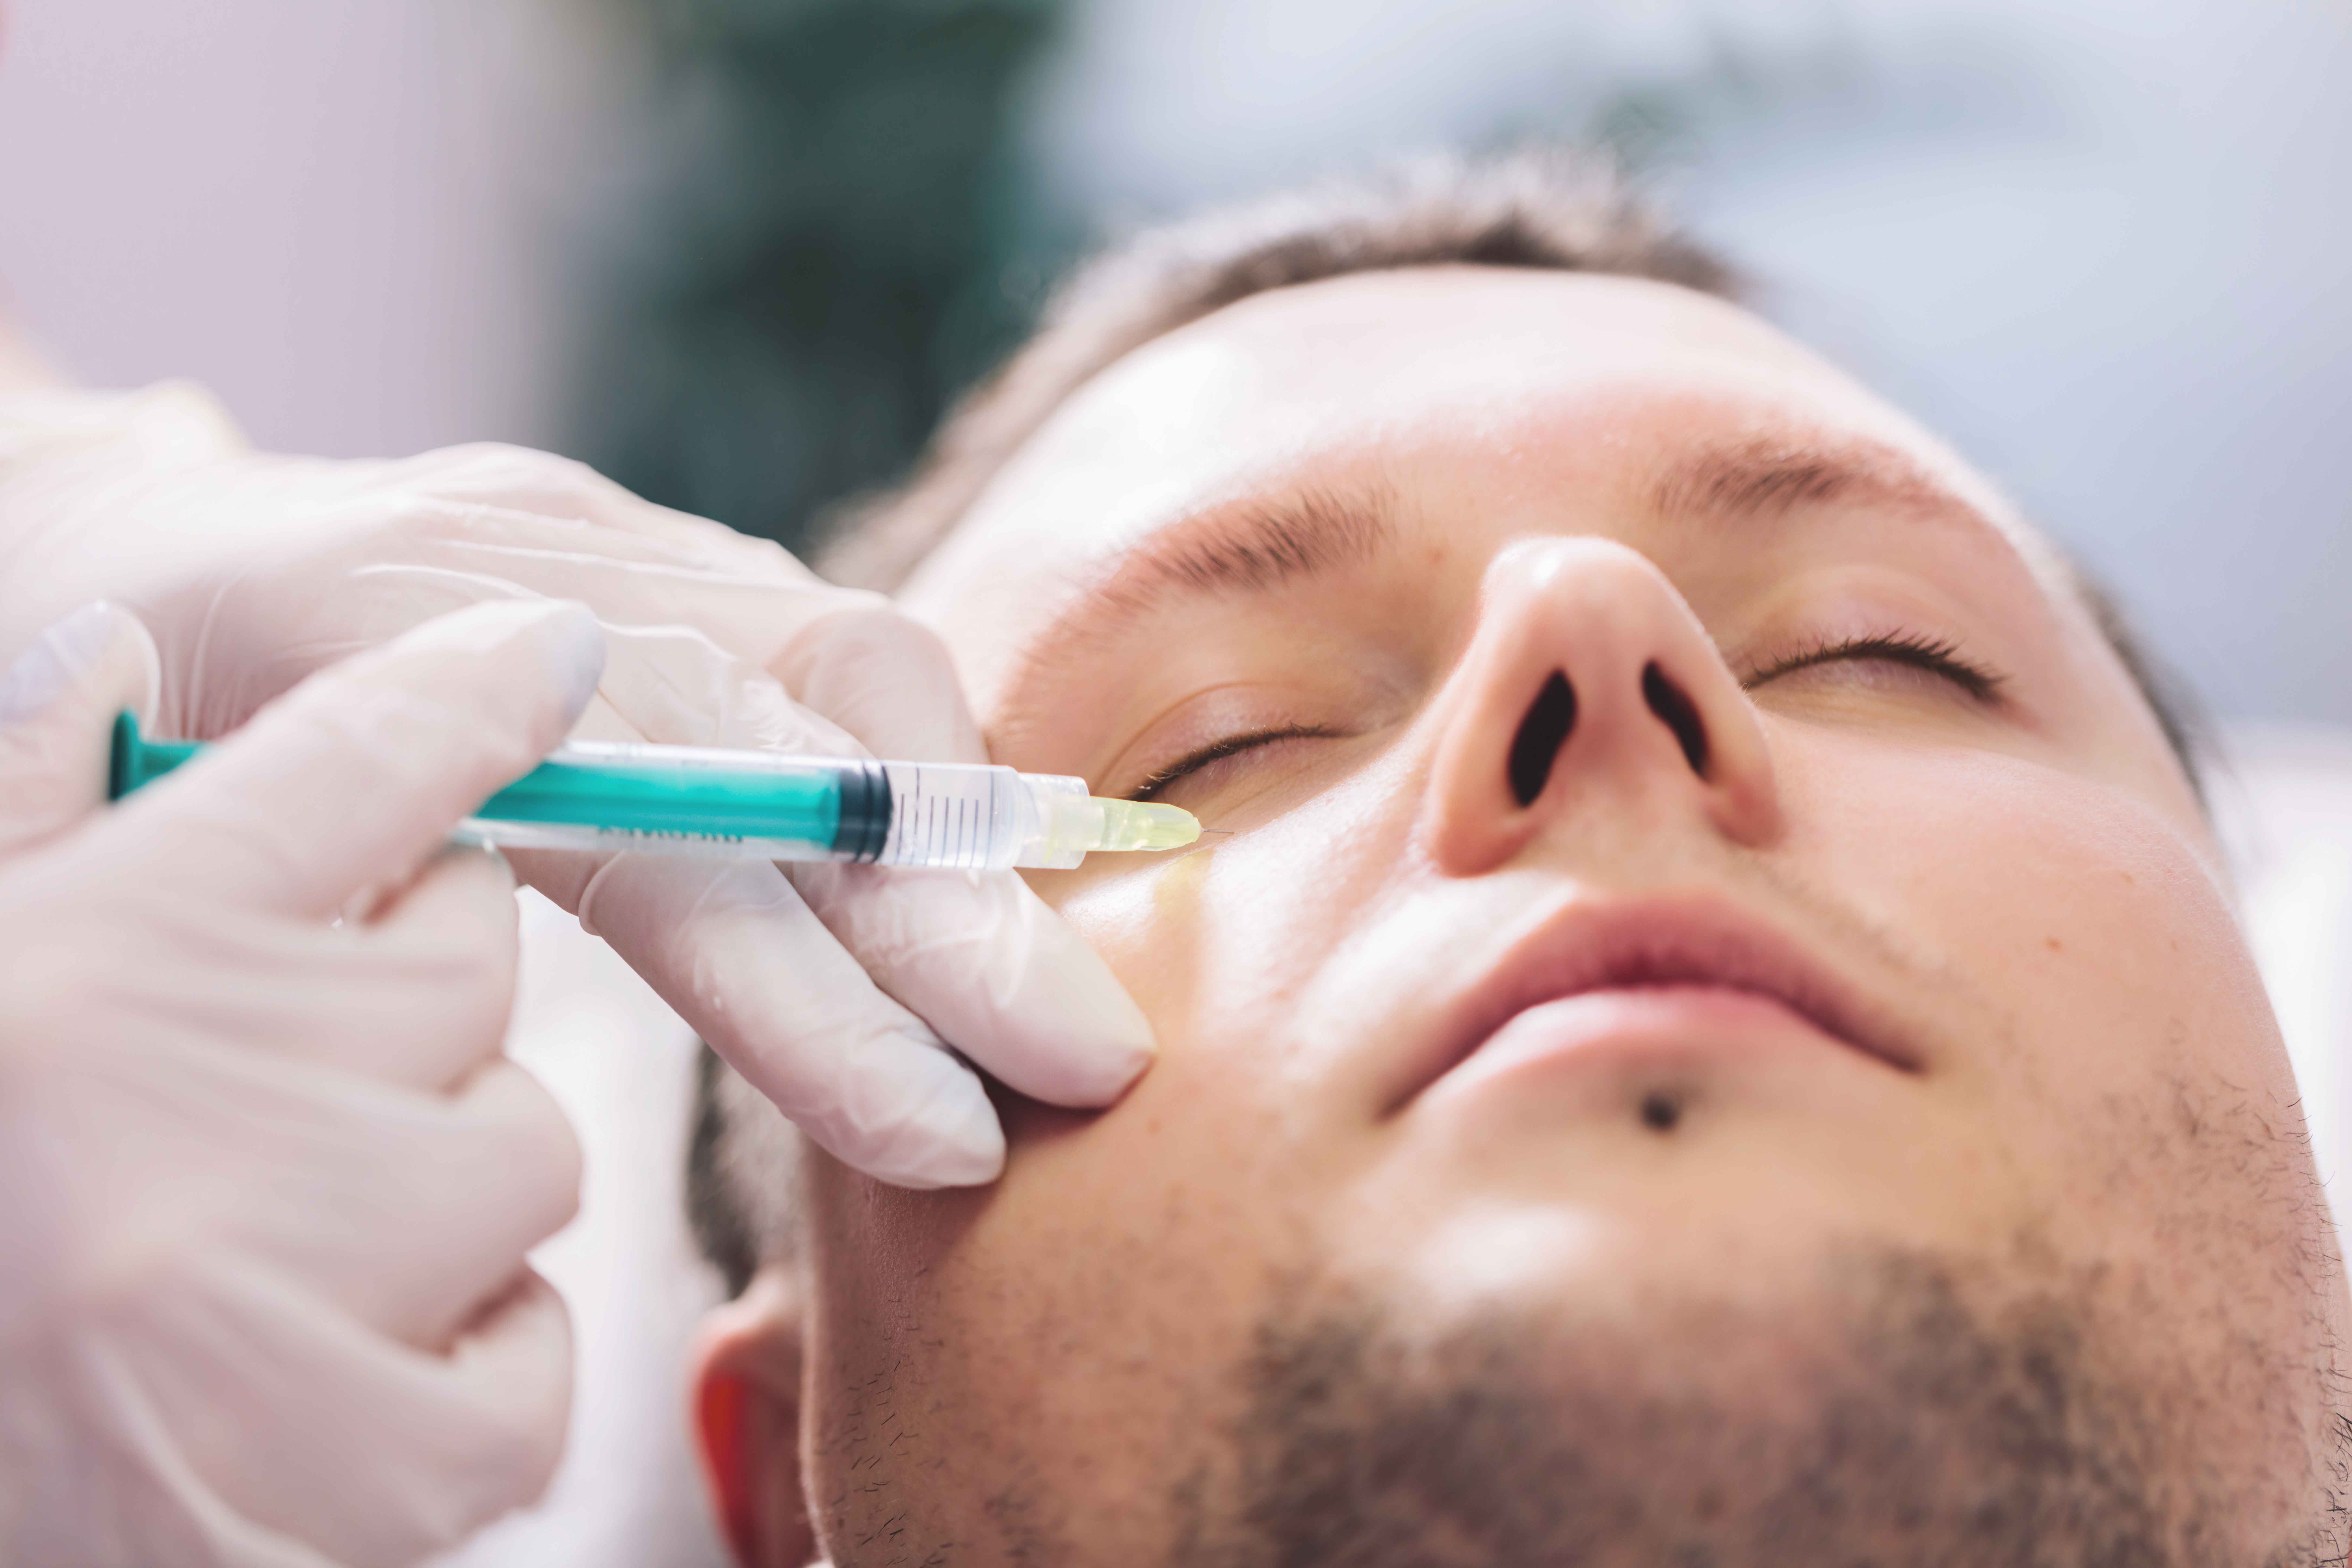 Young Man Getting Vampire Facelift Treatment | Reclaim Men's Clinic in St. Louis, MO